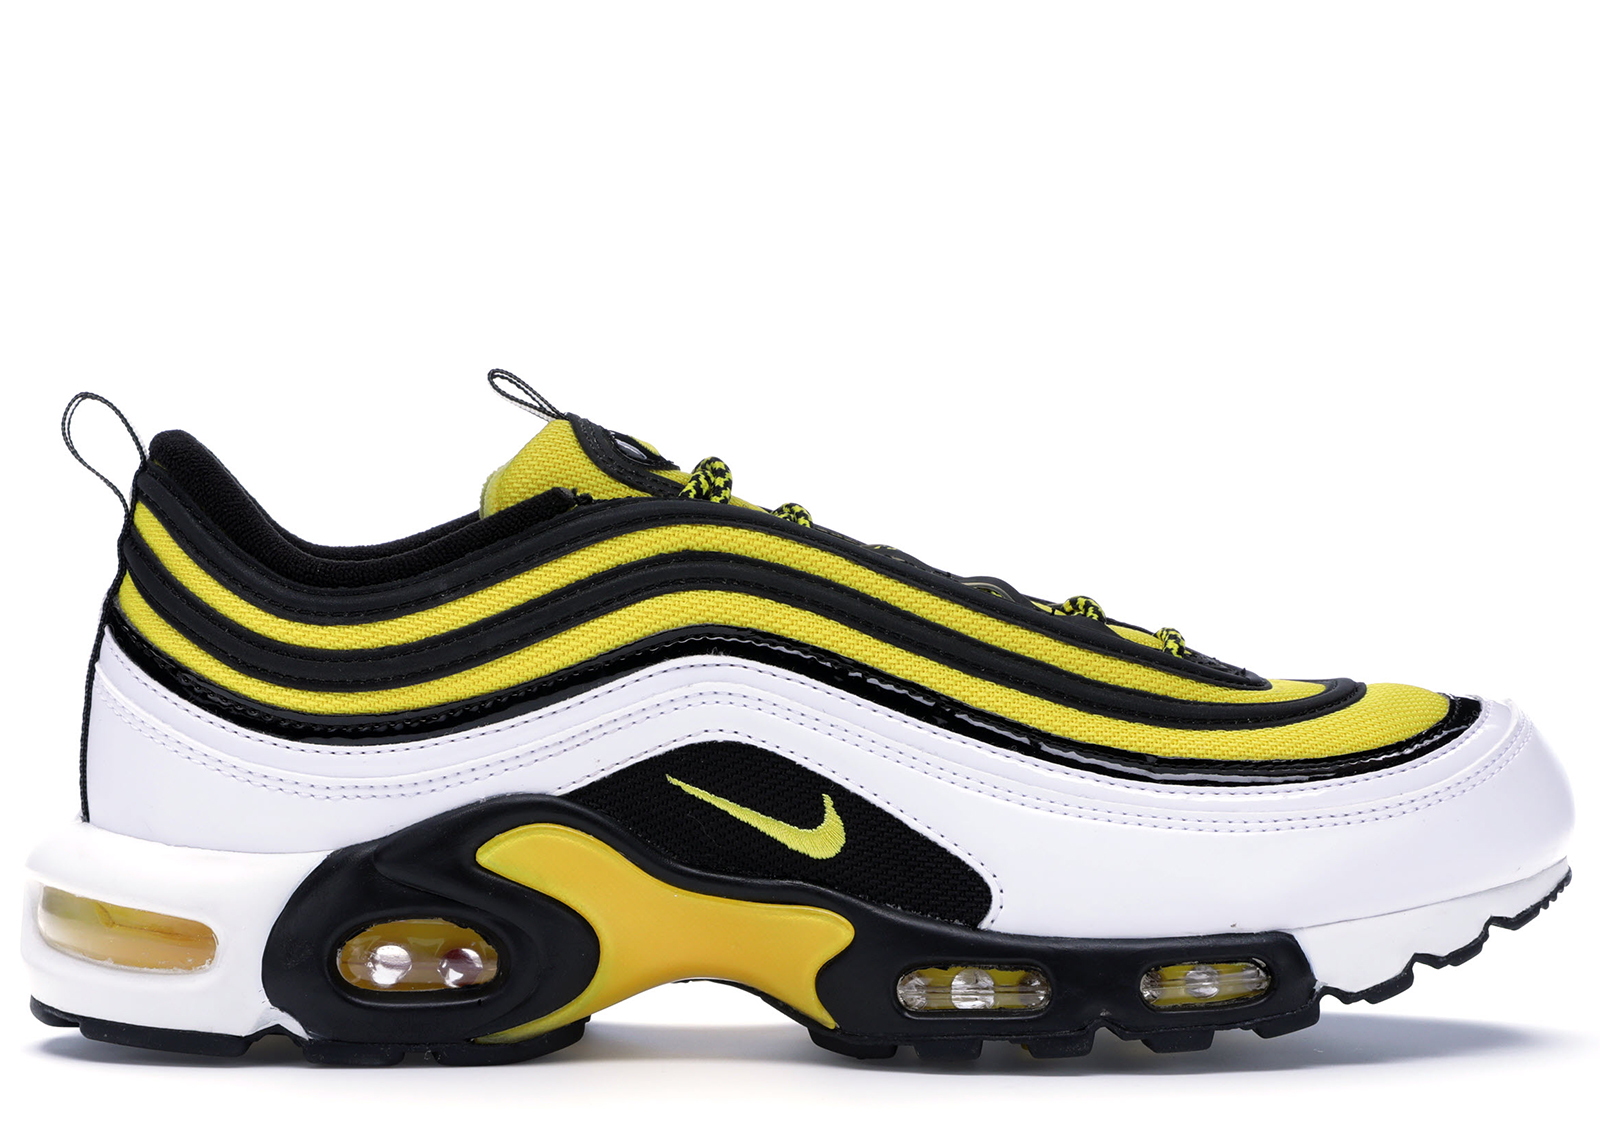 Nike Air Max Plus 97 Frequency Pack